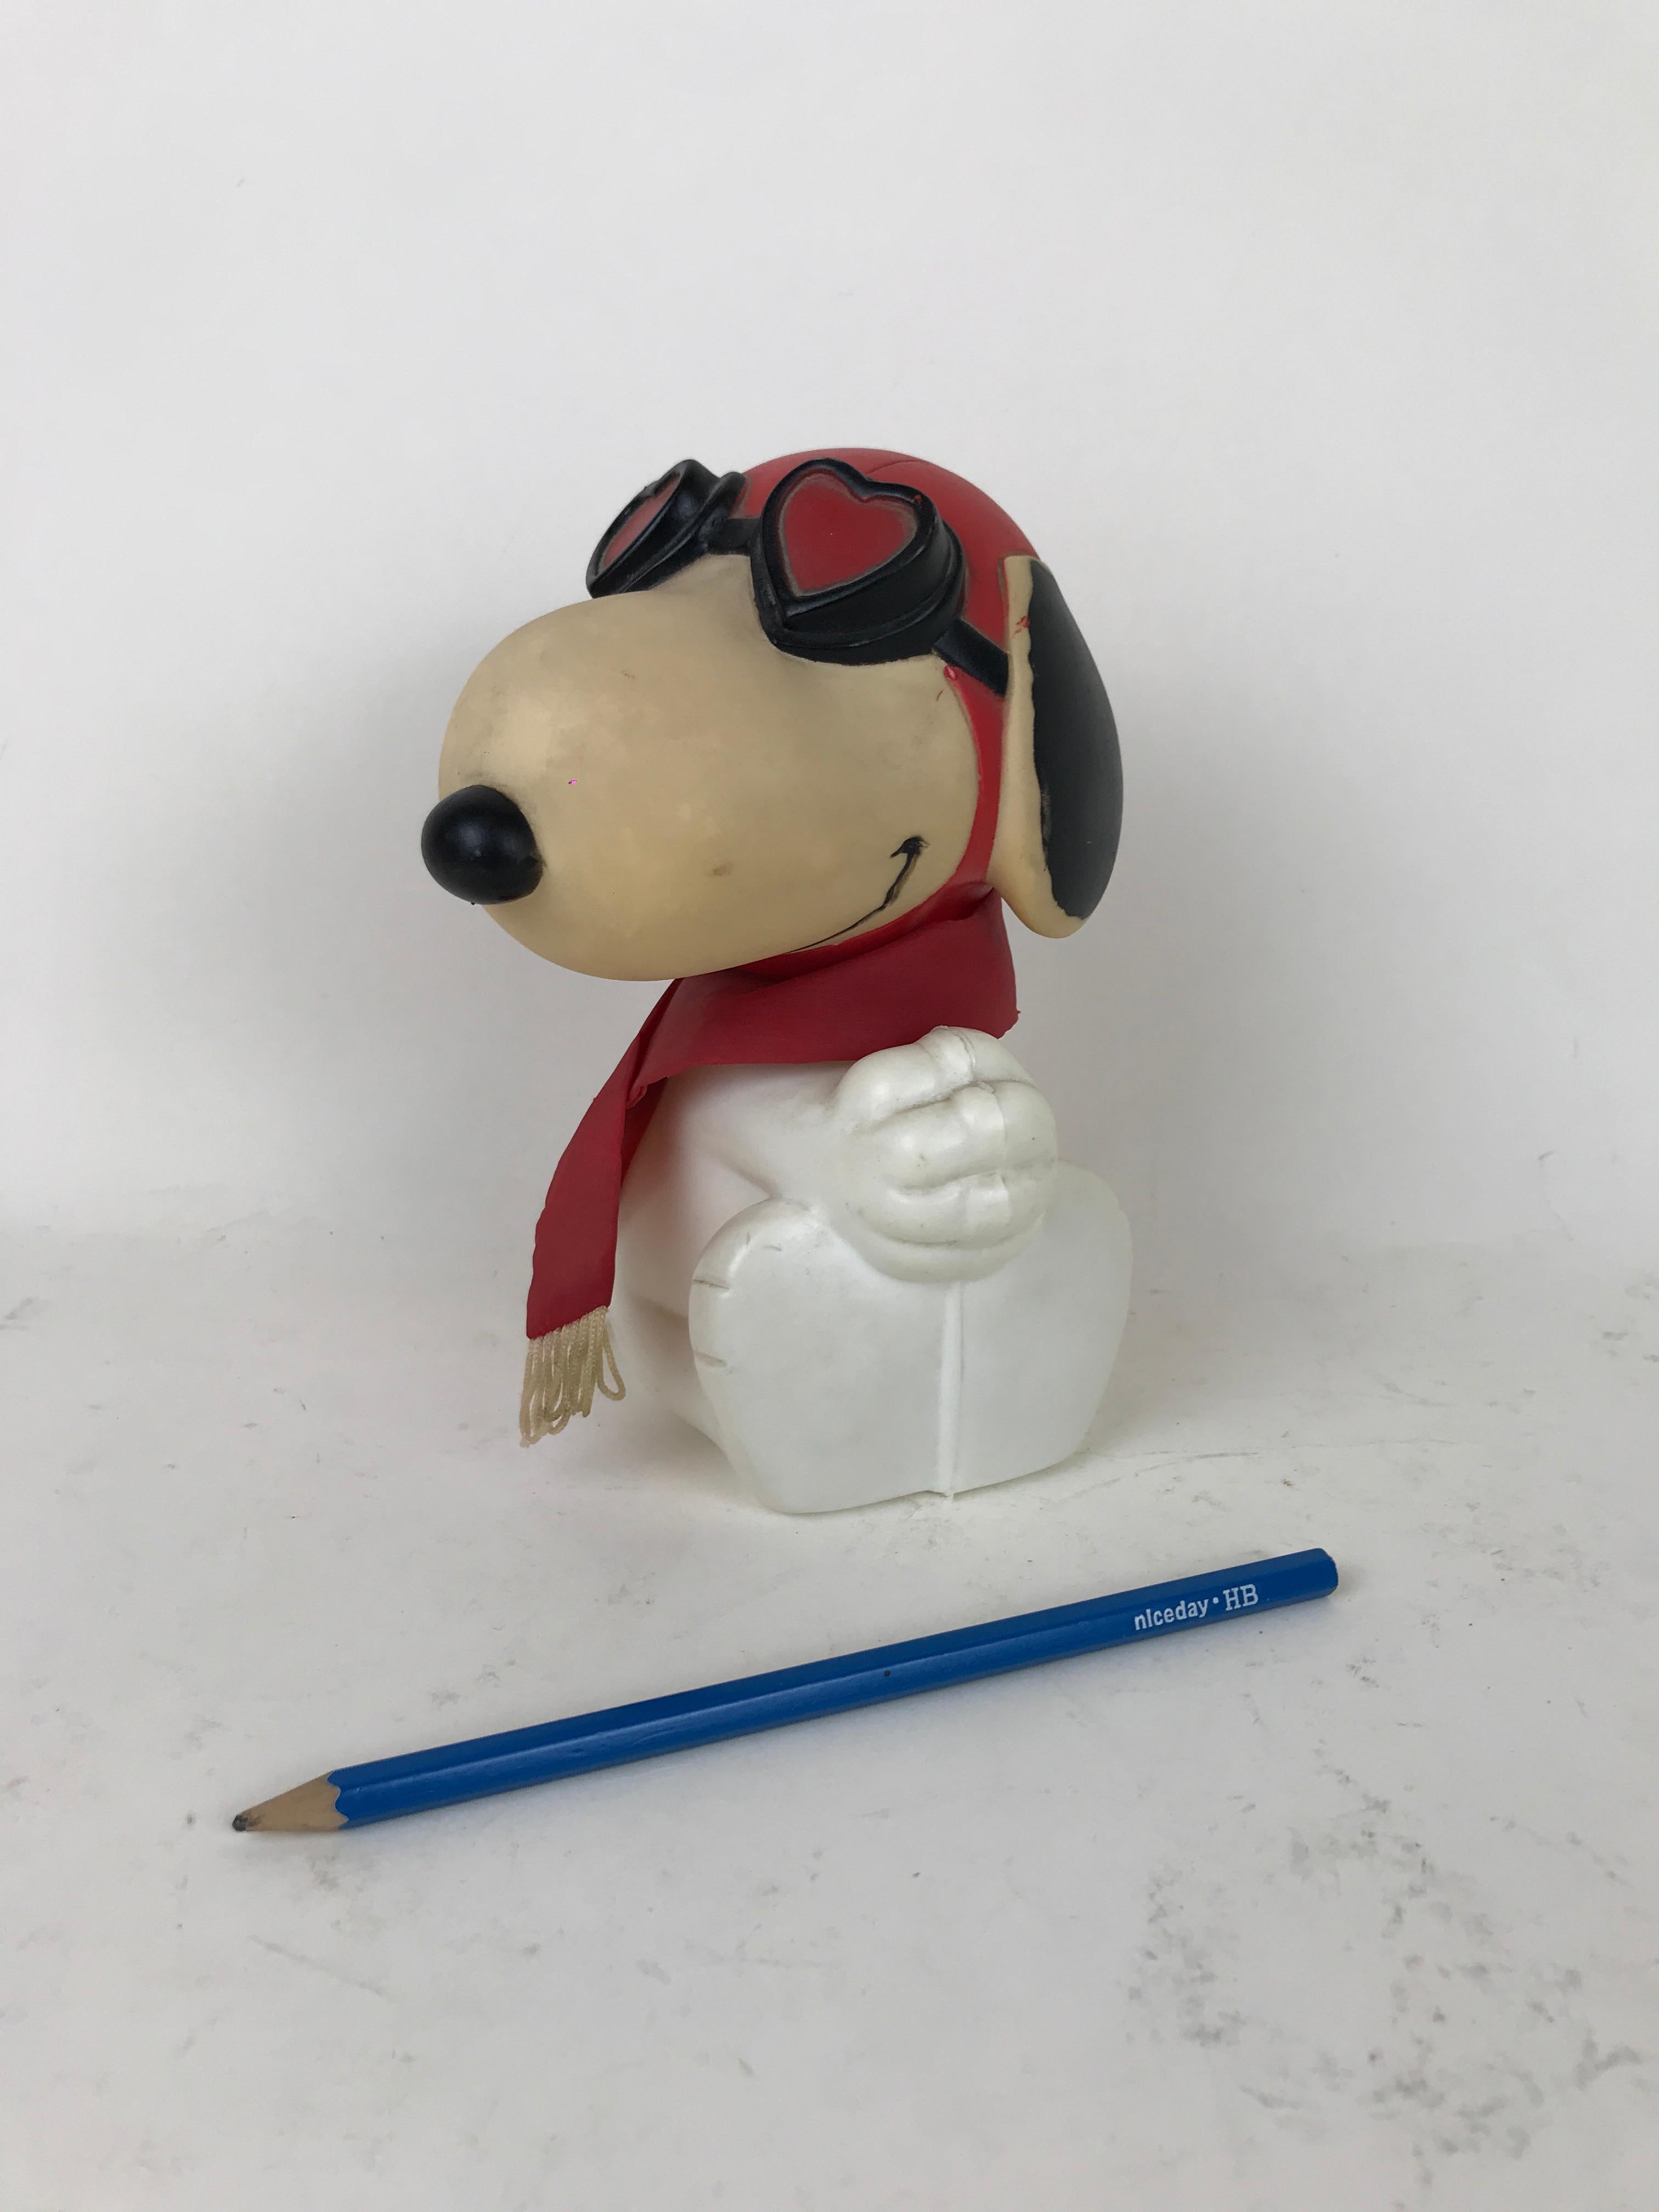 Vintage plastic bottle in the shape of Snoopy wearing a red scarf and heart shaped googles made in US in the 1960s.

The bottle can be opened and used and is composed by thee components (head, body and scarf)

Marked on bottom: 
Snoopy ©